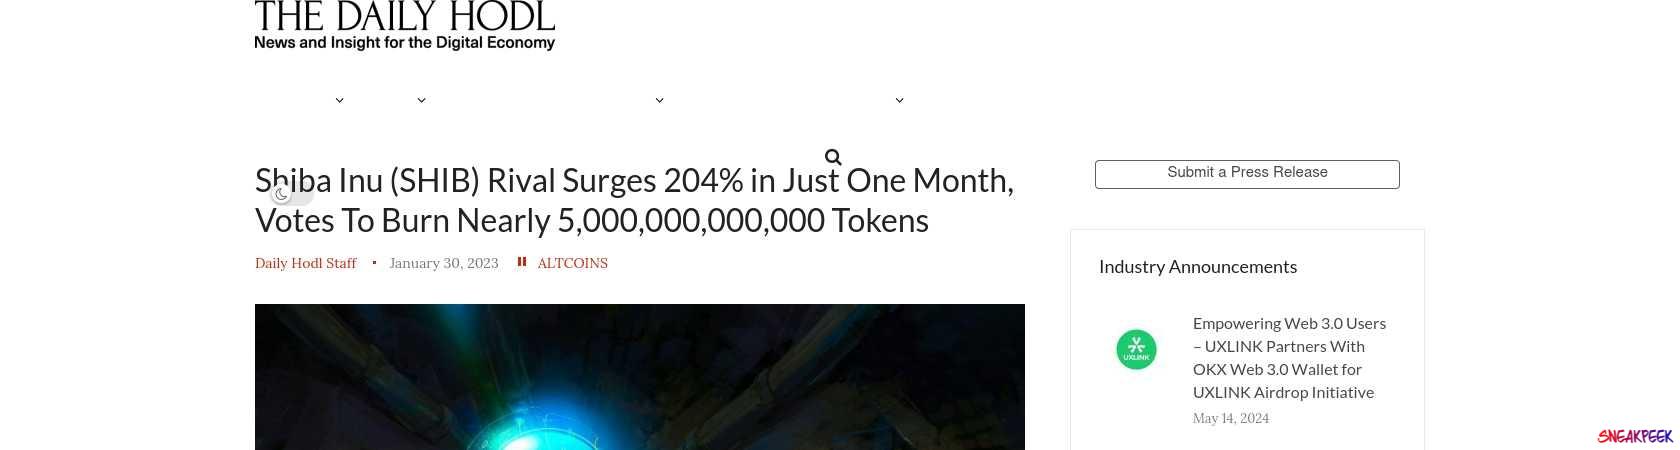 Read the full Article:  ⭲ Shiba Inu (SHIB) Rival Surges 204% in Just One Month, Votes To Burn Nearly 5,000,000,000,000 Tokens